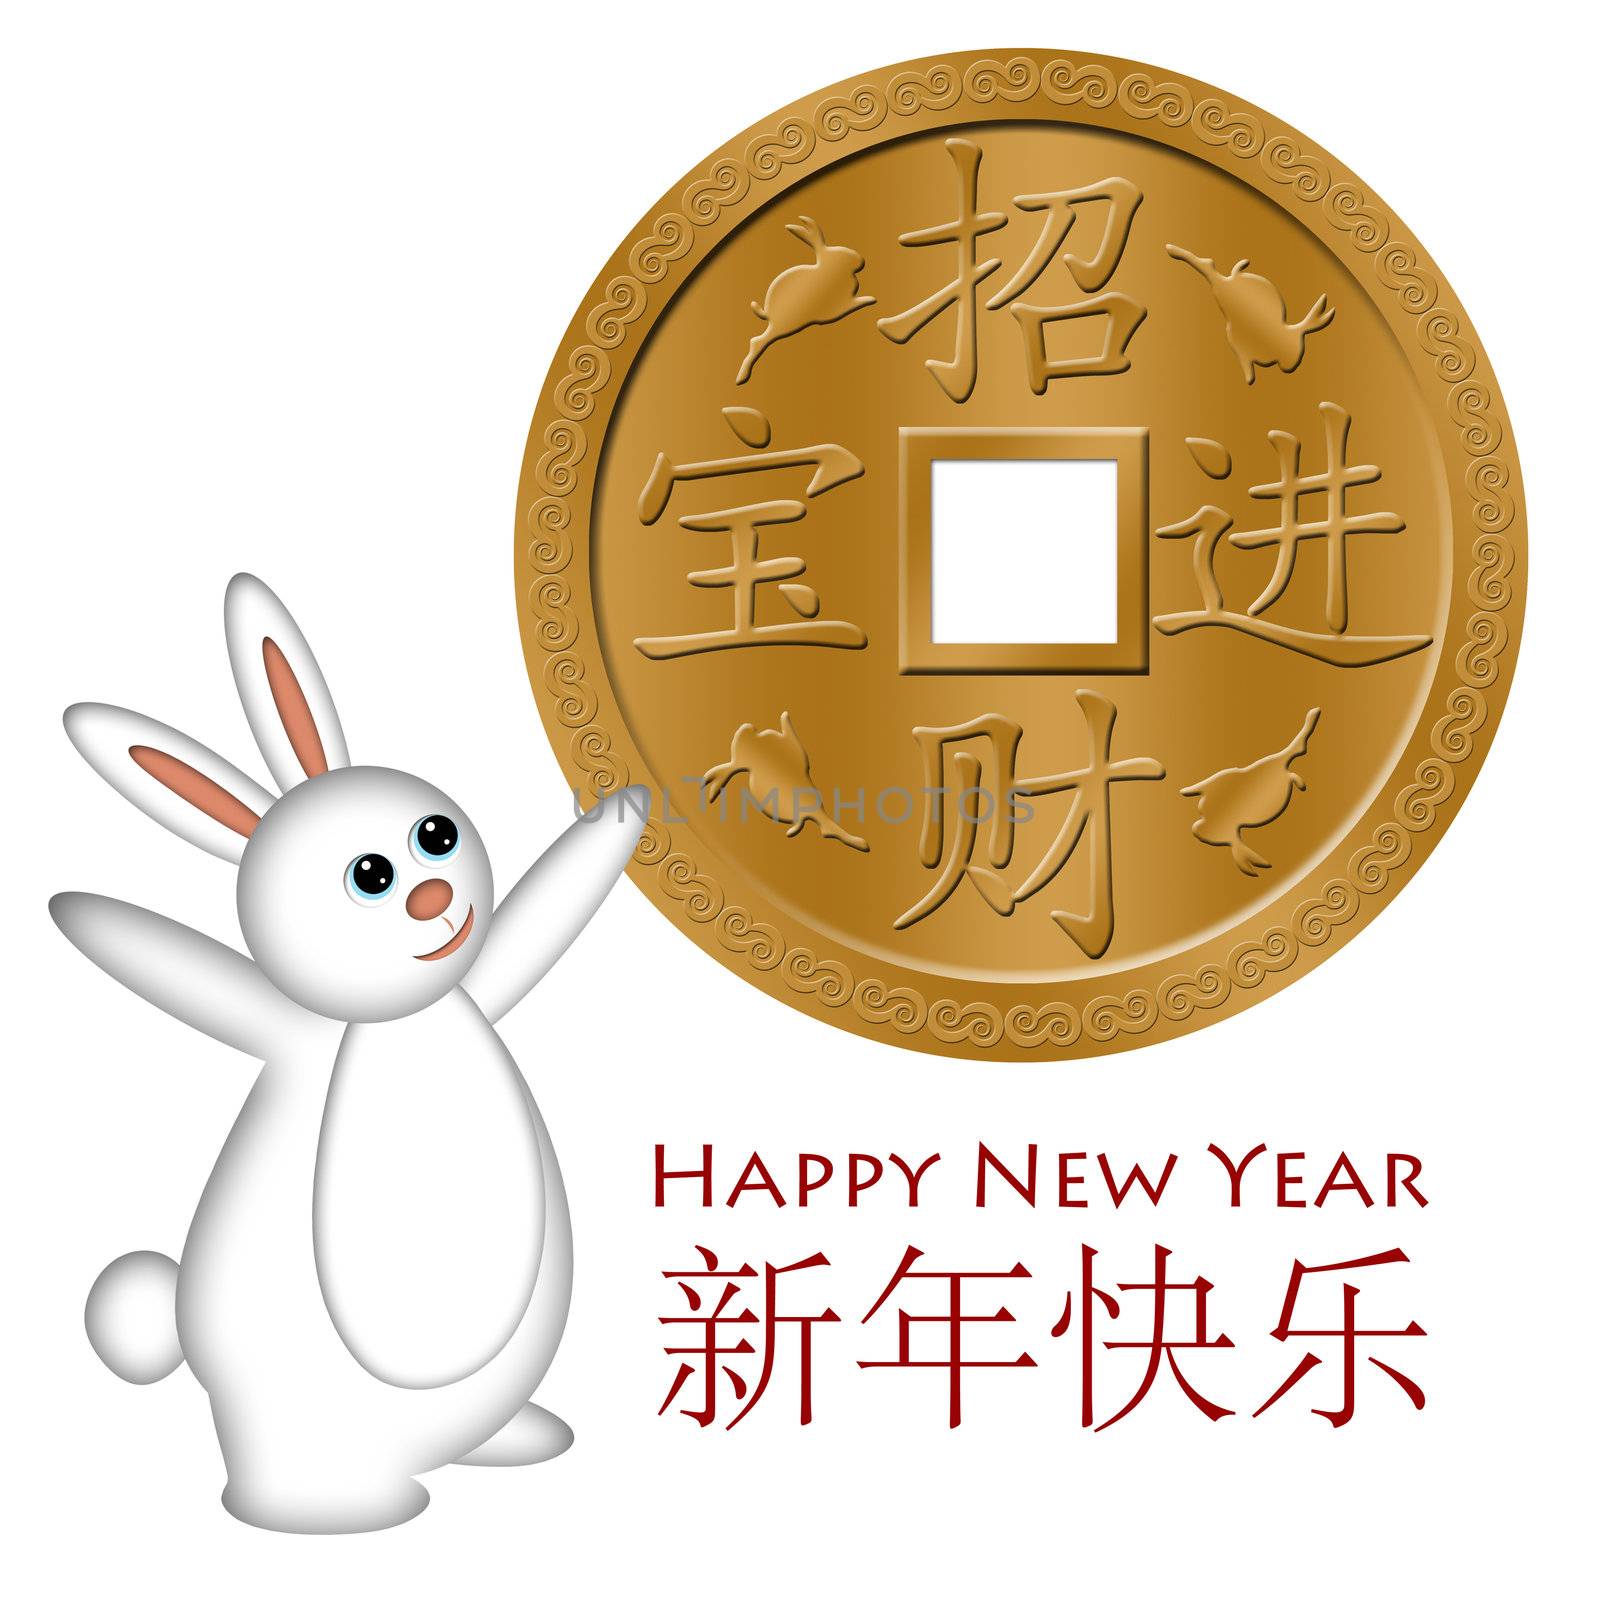 Rabbit Welcoming the Chinese New Year with Gold Coin by Davidgn